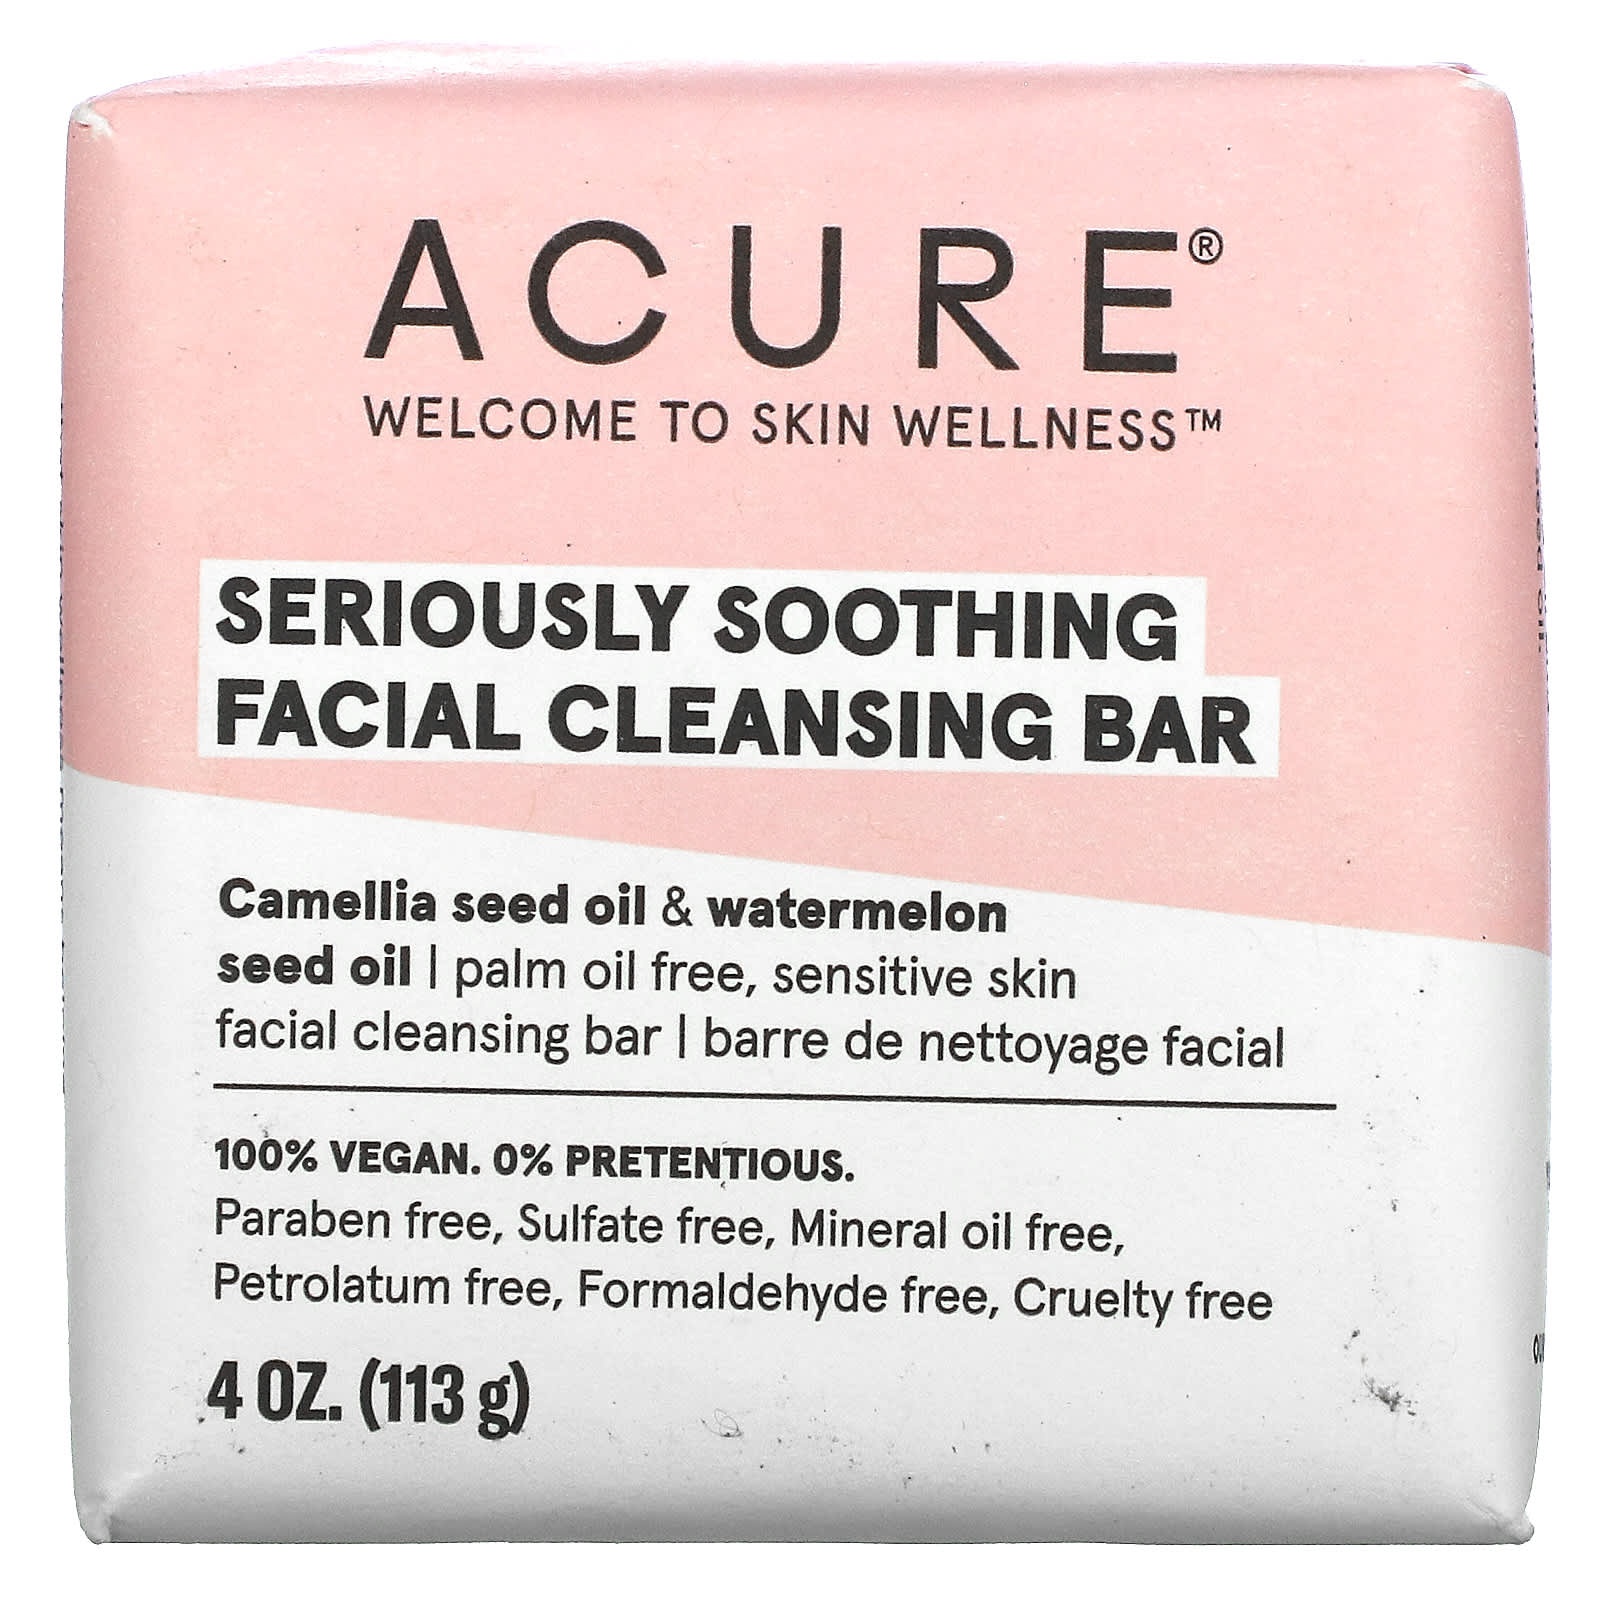 Acure Seriously Soothing Facial Cleansing Bar